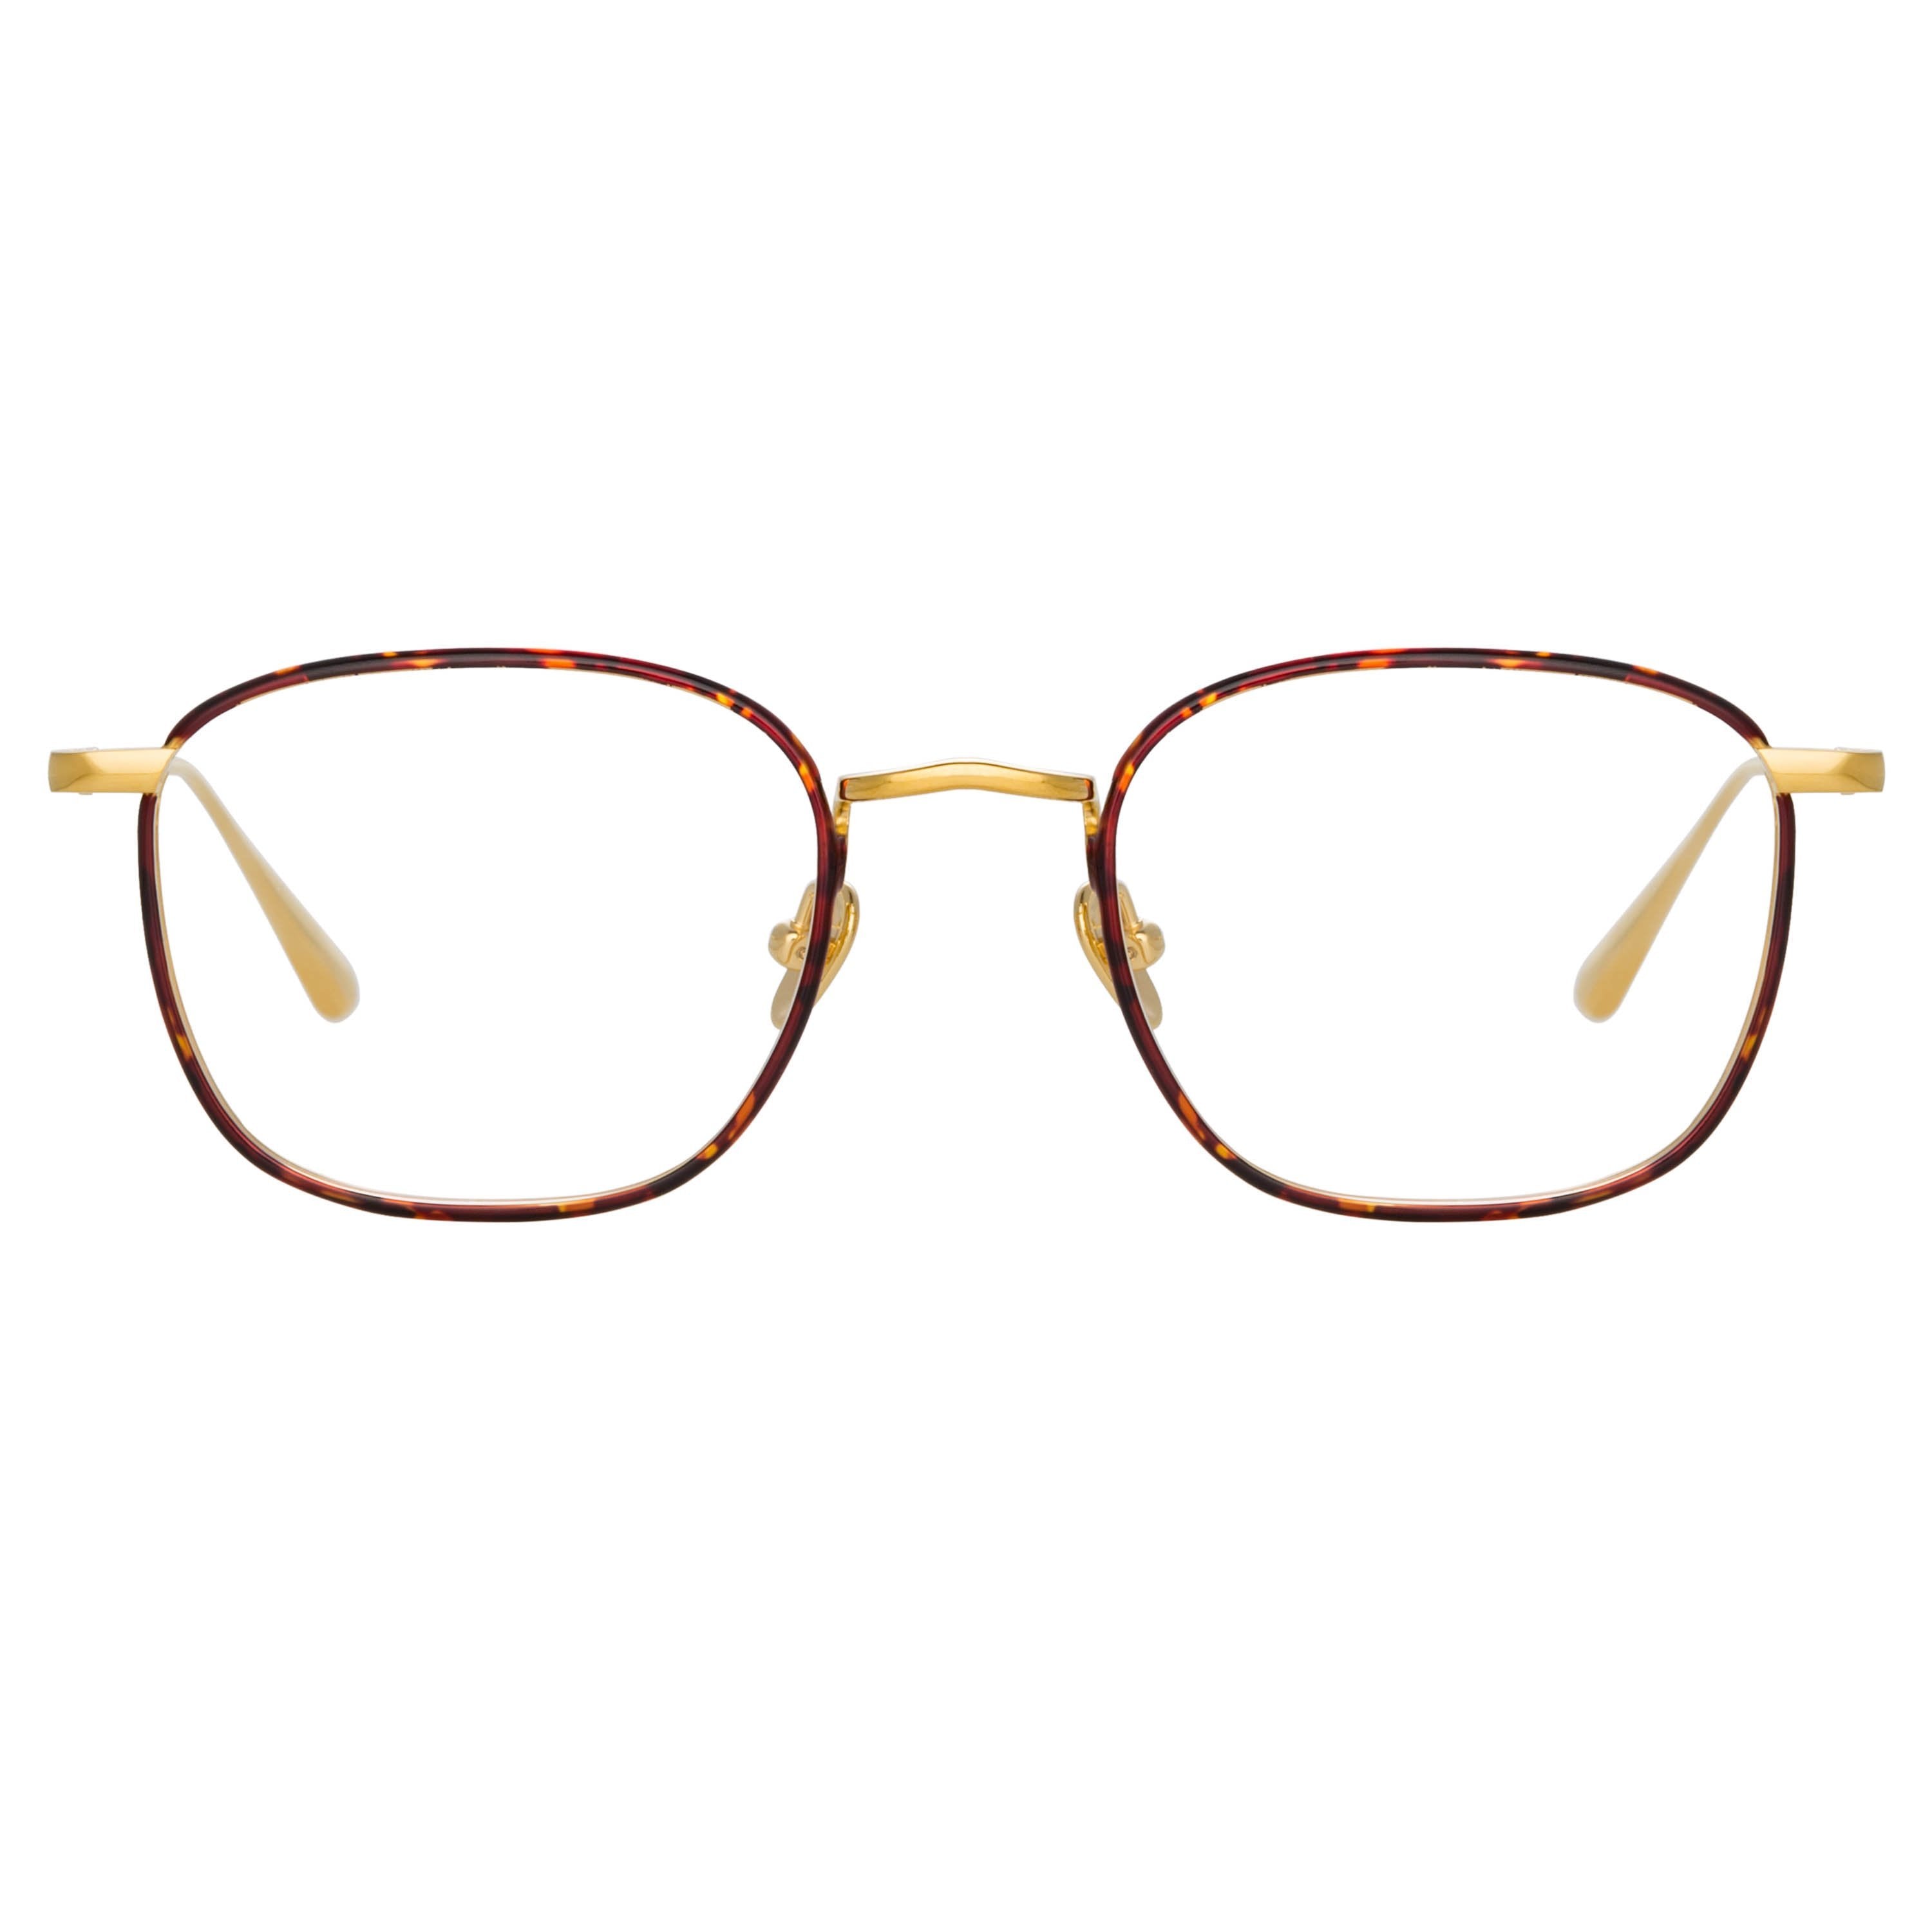 Color_LFL1228C3OPT - Hendrik Oval Optical Frame in Yellow Gold and Tortoiseshell